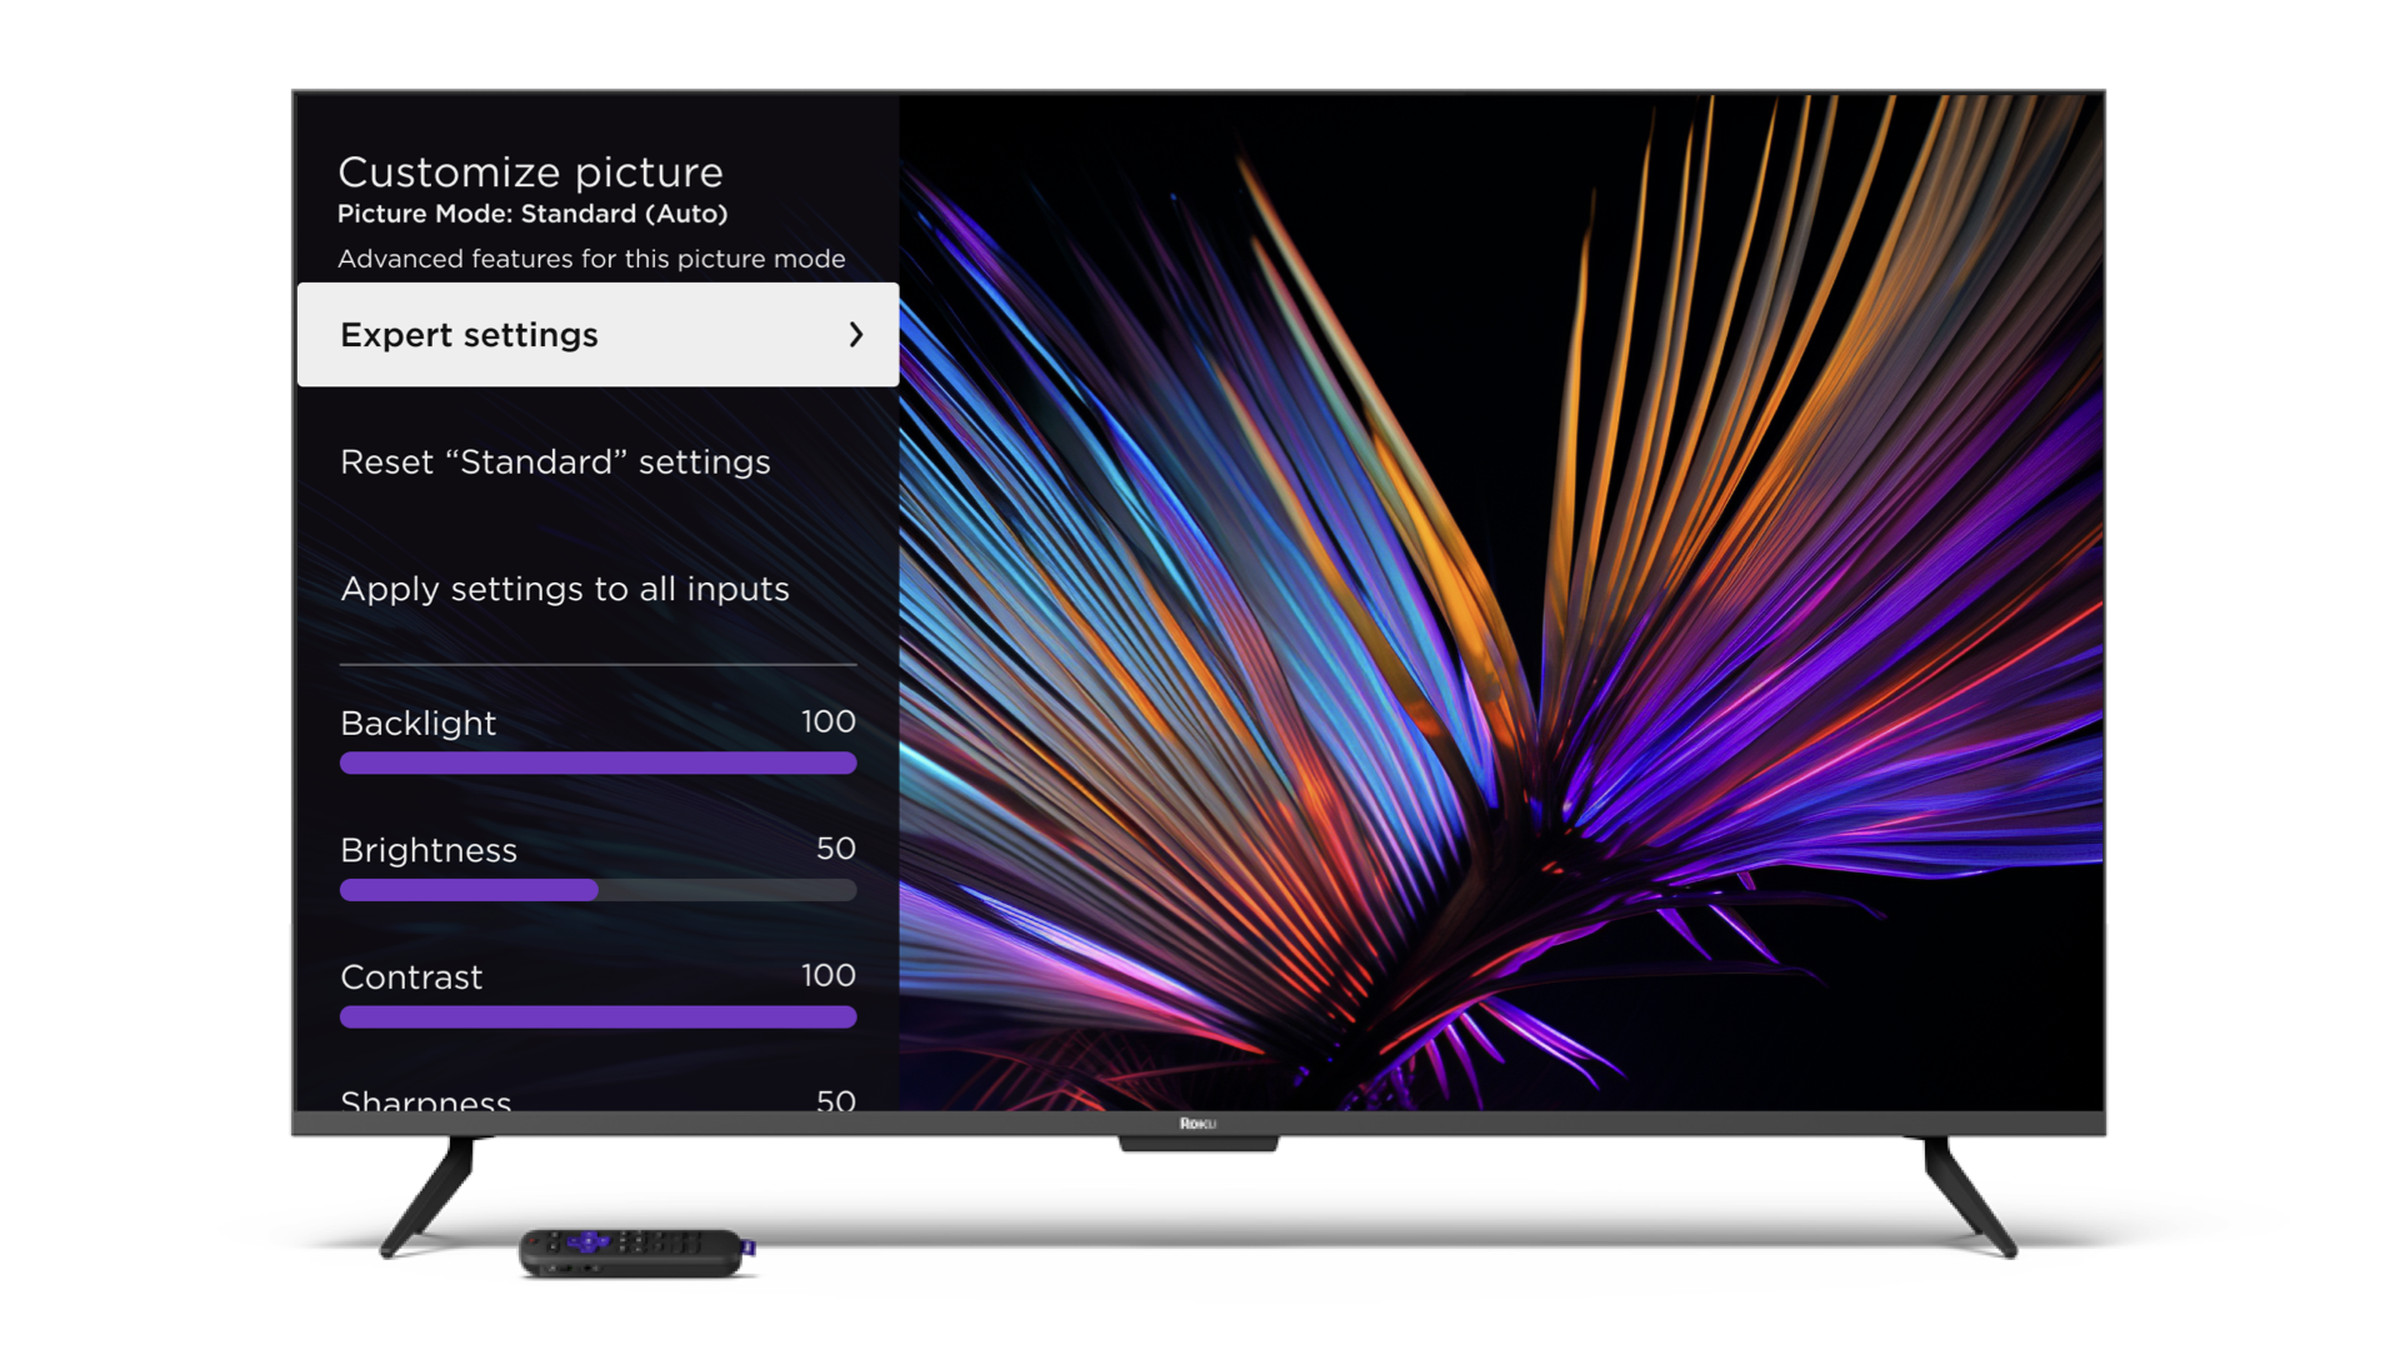 An image showing Roku’s expert picture settings screen.